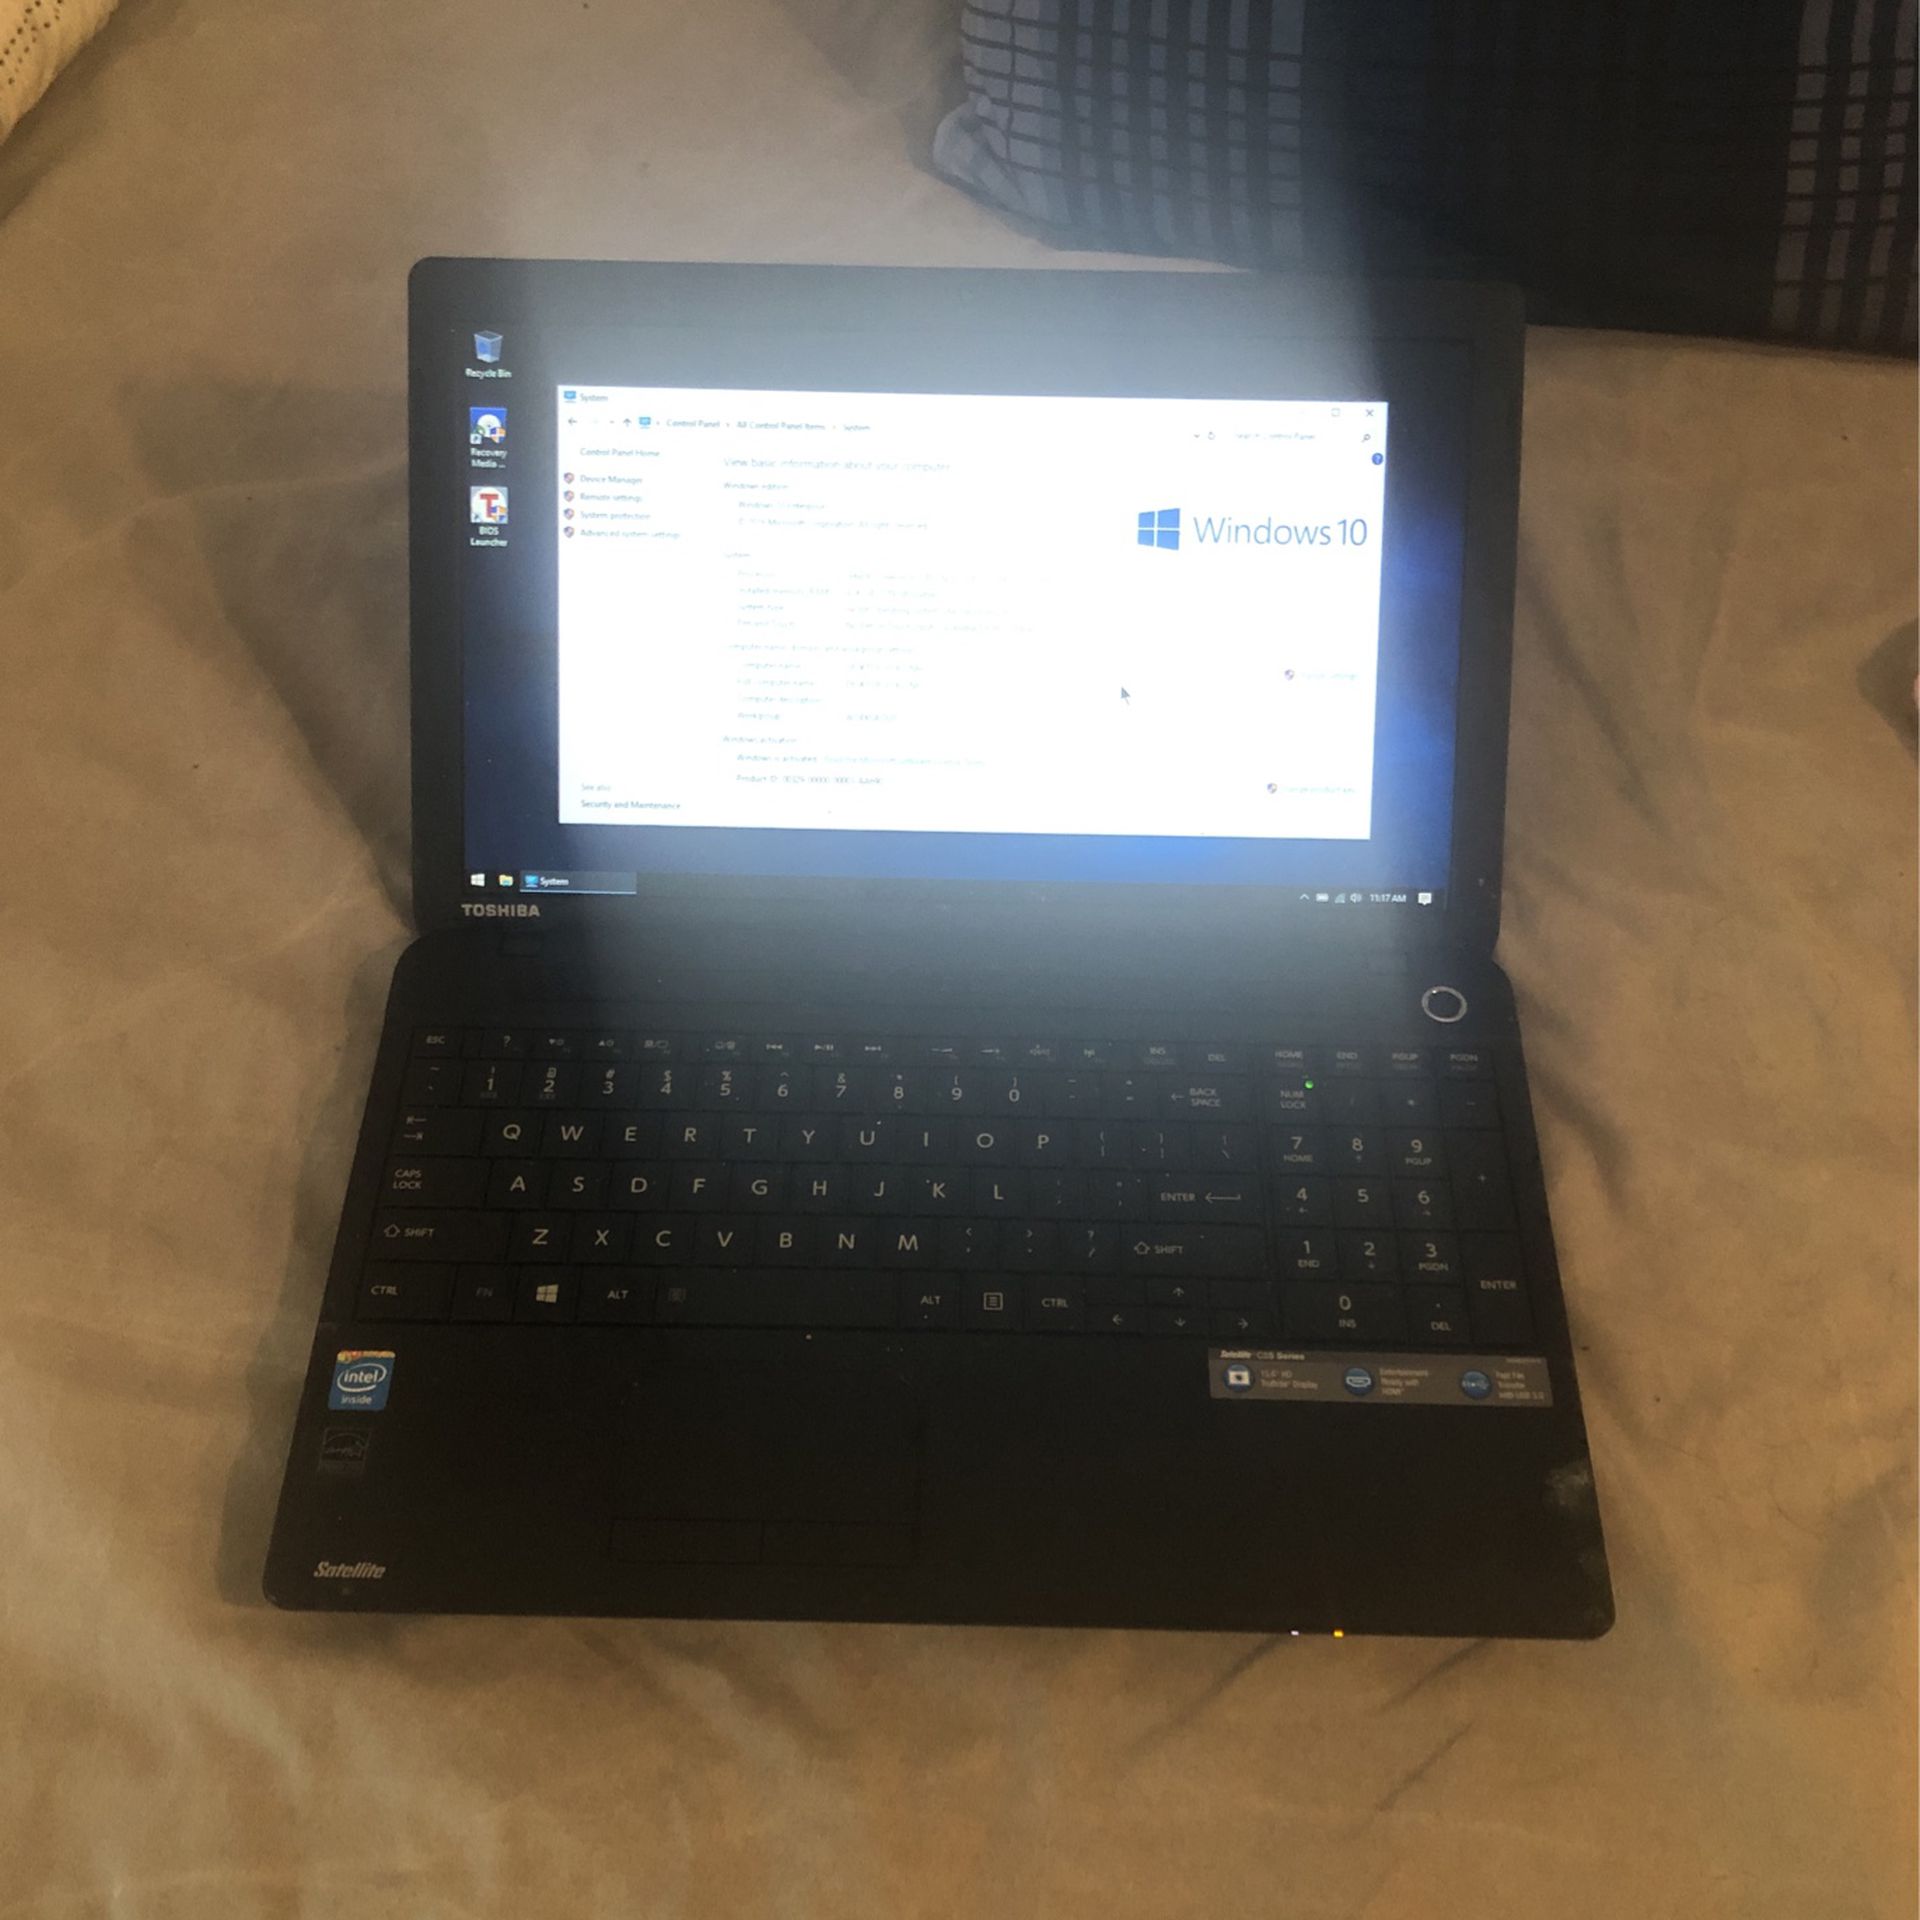 Toshiba Laptop- C55 Series, 17inch LCD Display, Intel For Laptop 